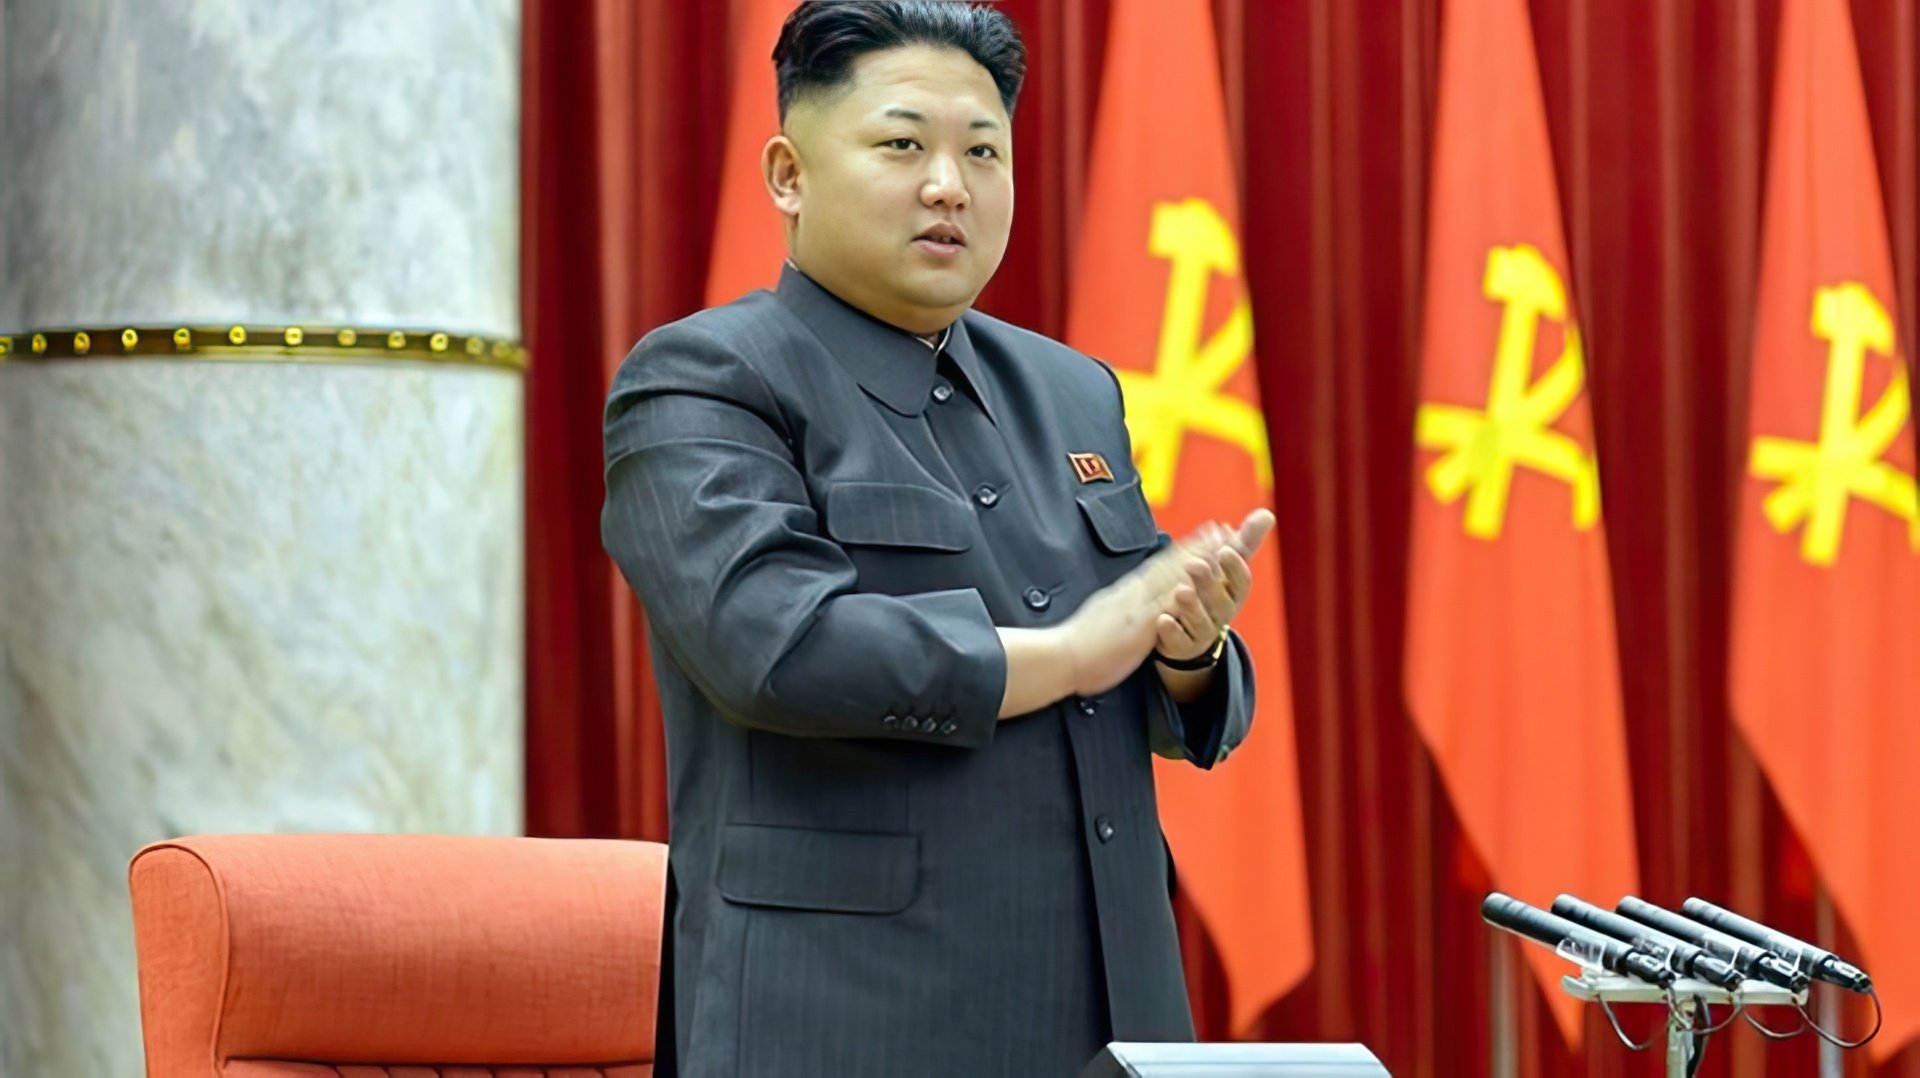 Kim Jong-un’s foreign policy is set apart by severe rigidity and refusal to compromise